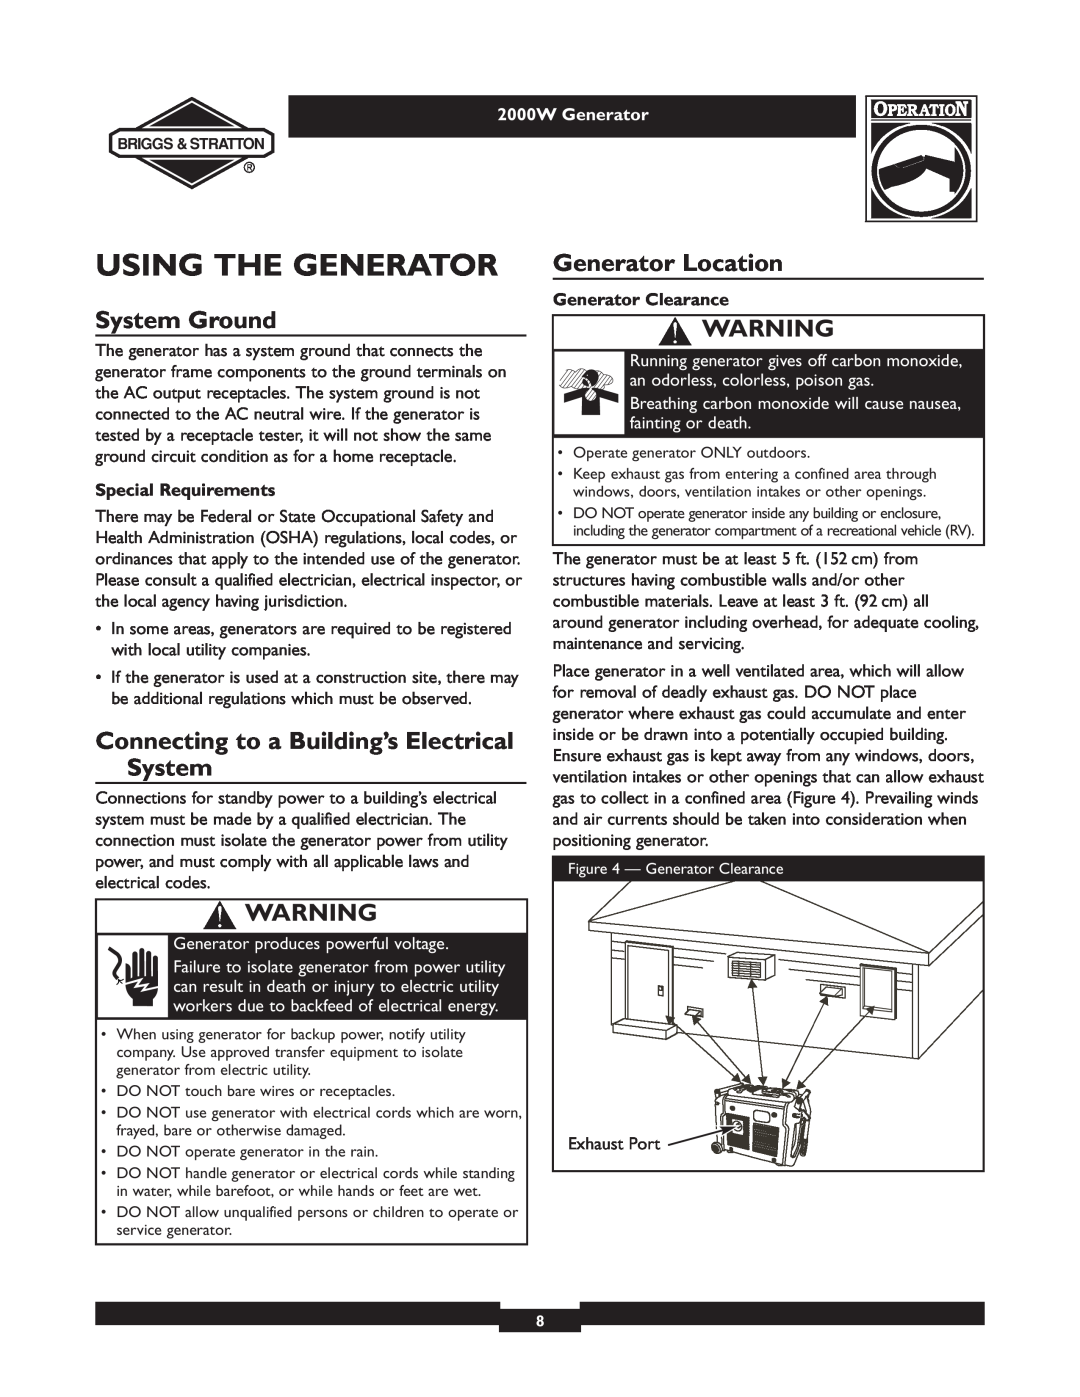 Briggs & Stratton 30239 Using The Generator, System Ground, Connecting to a Building’s Electrical System, 2000W Generator 